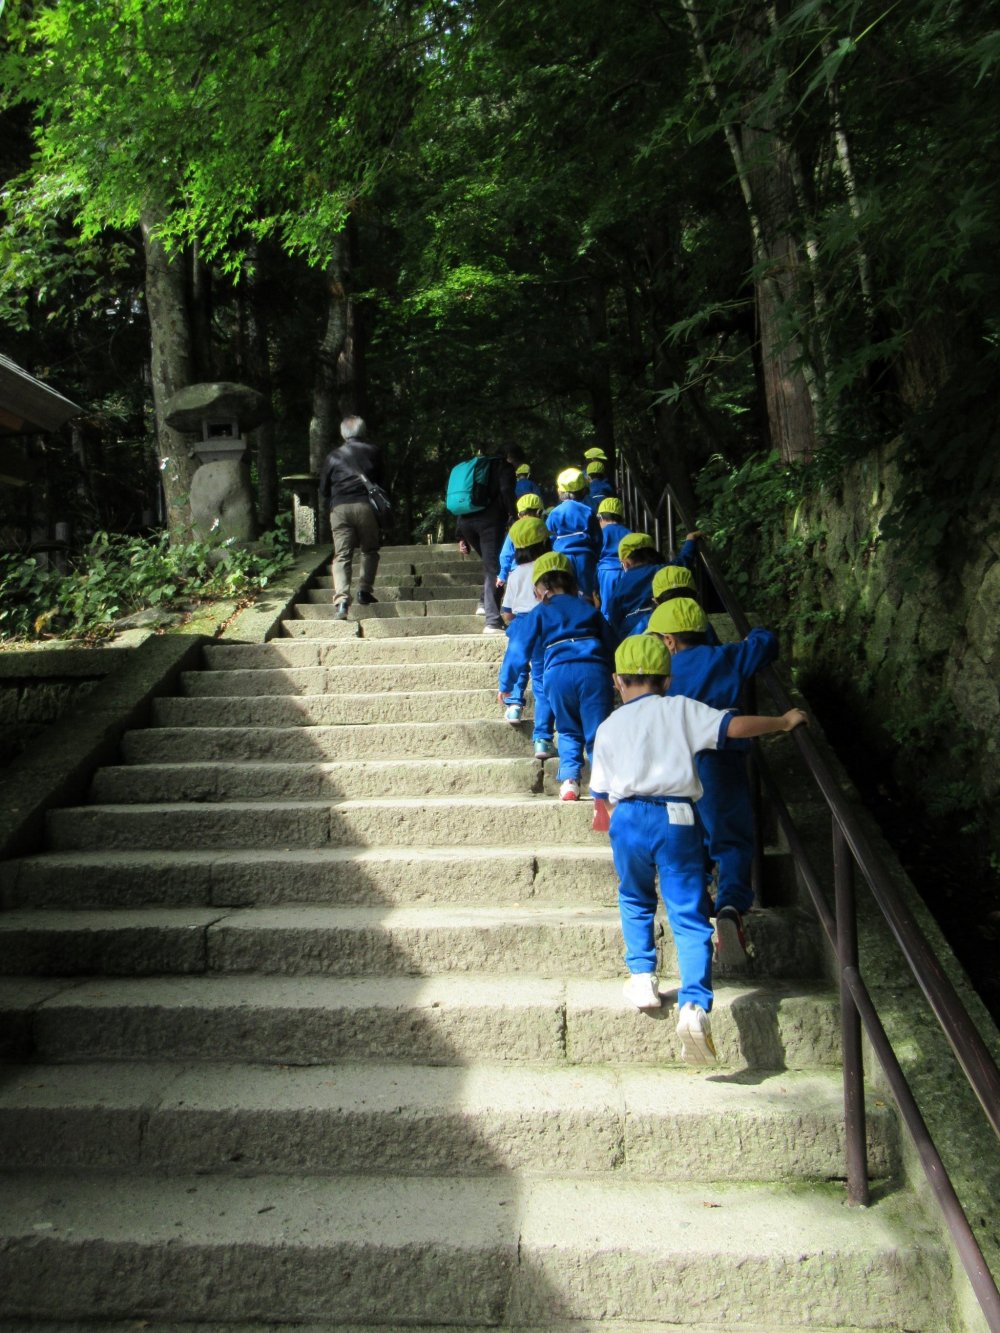 A group of school children visiting Yamadera